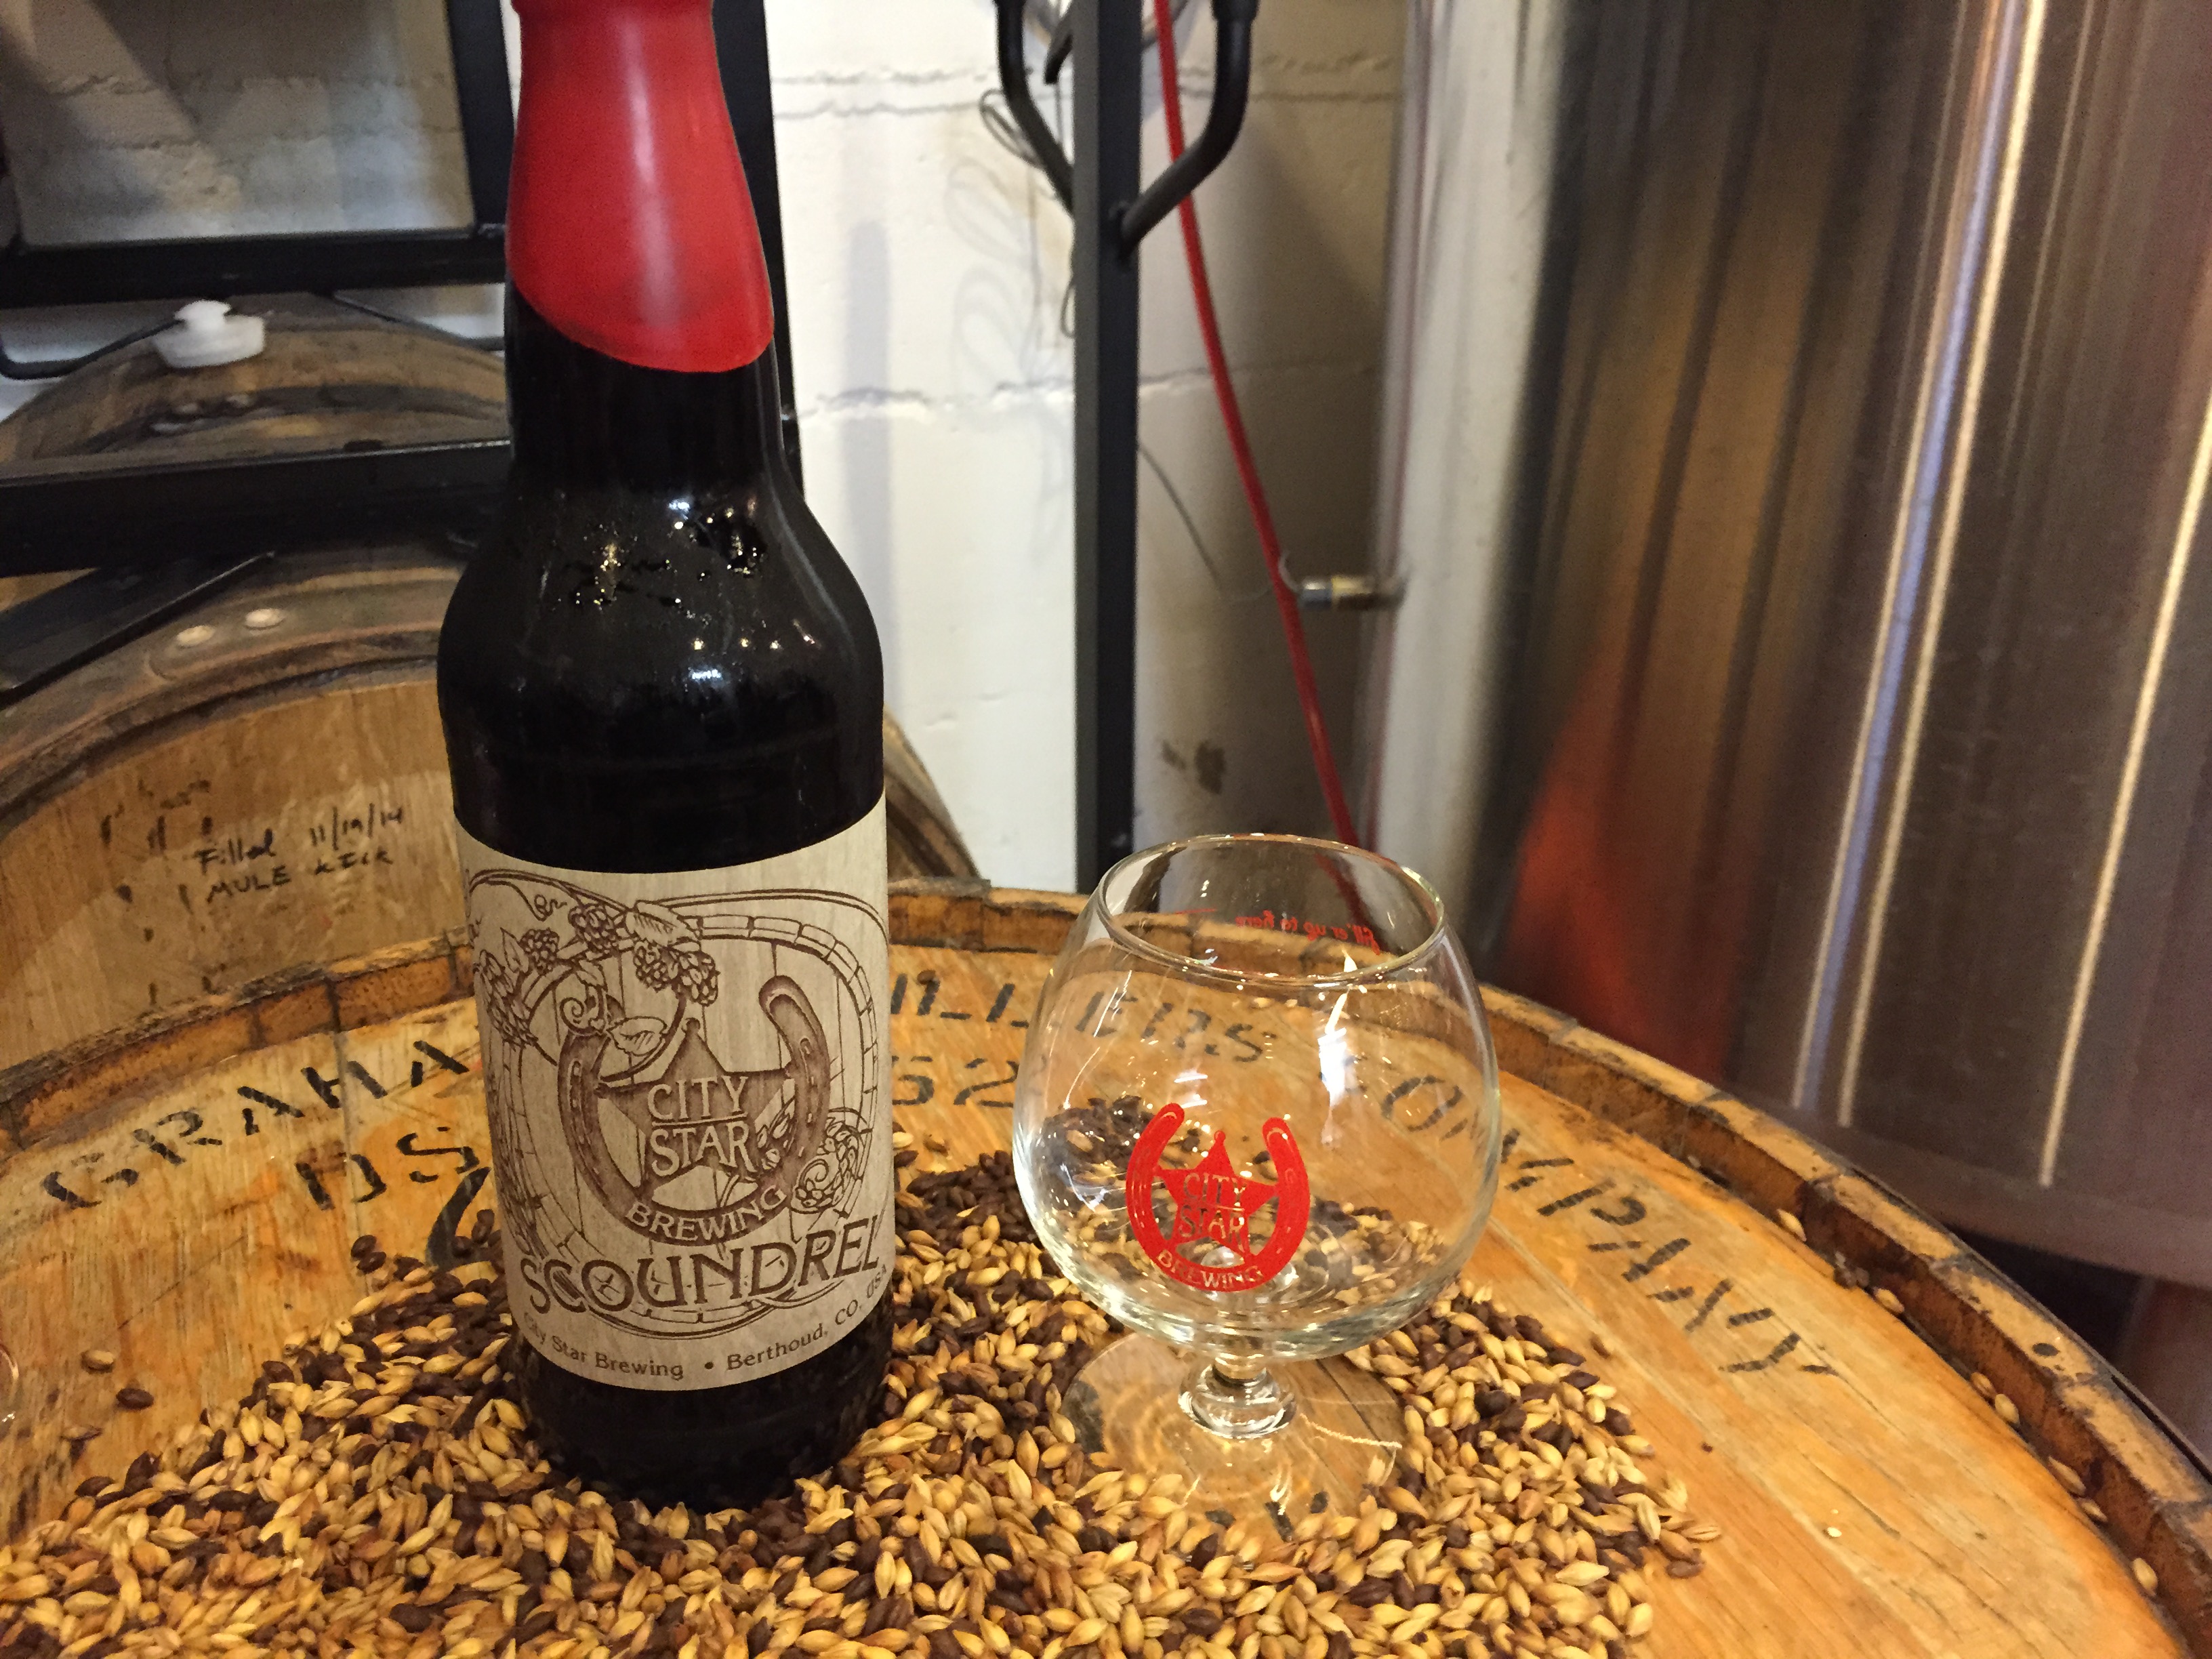 City Star Brewing Releases Scoundrel